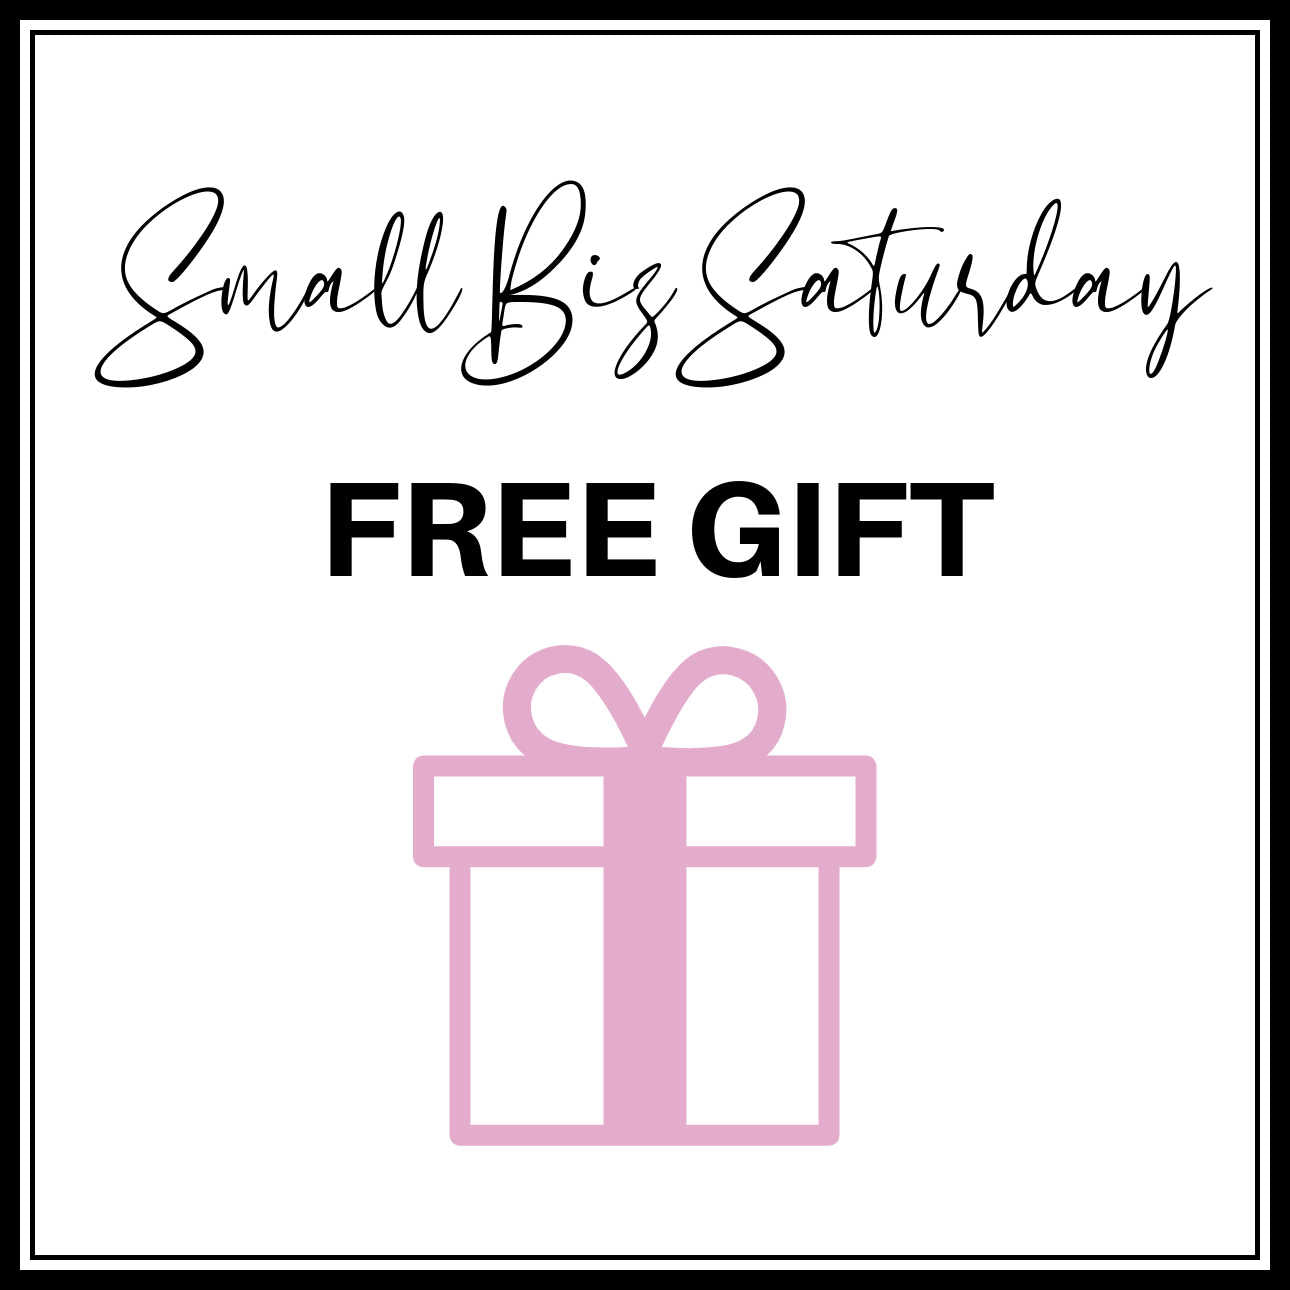 Small Business Saturday FREE Gift